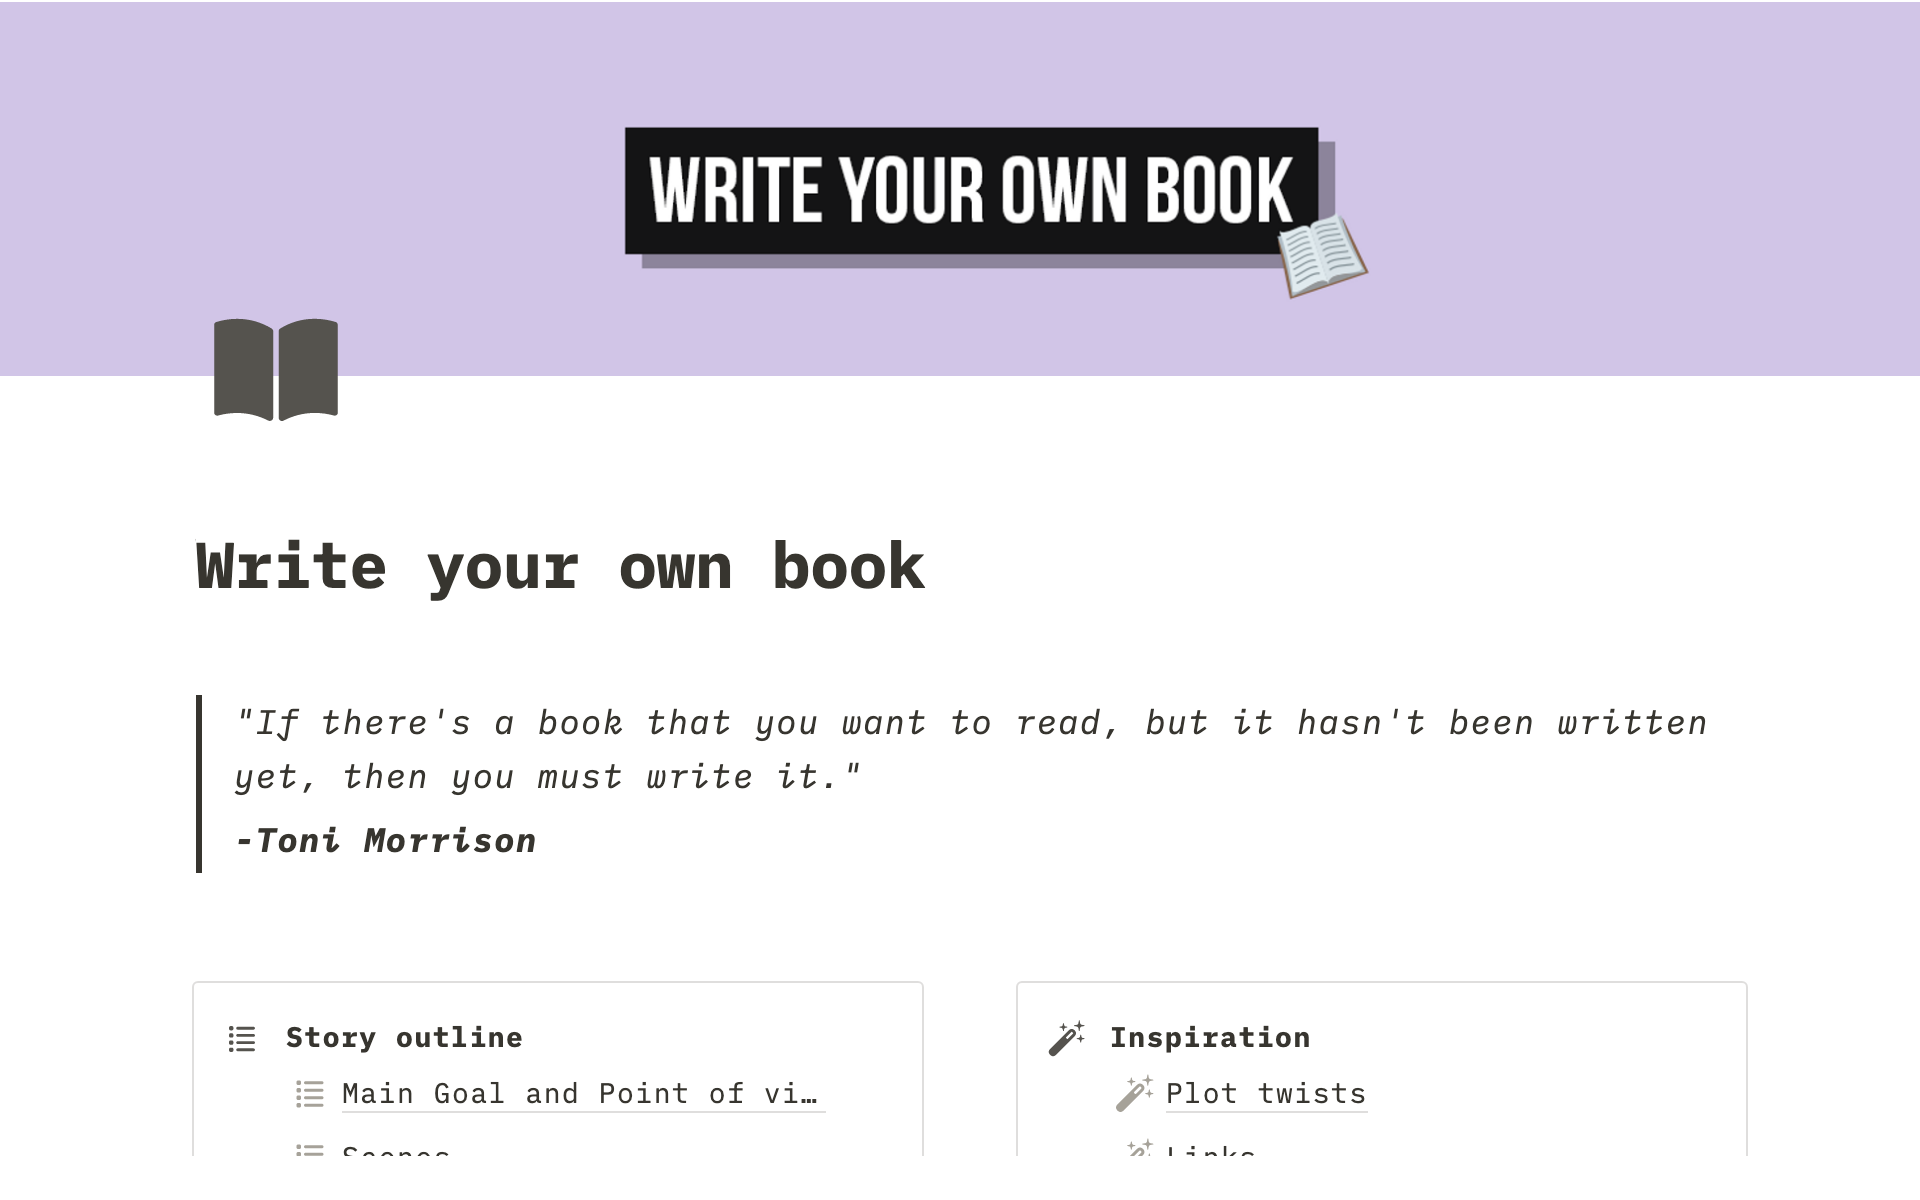 Step-by-step help to get started with writing a book.